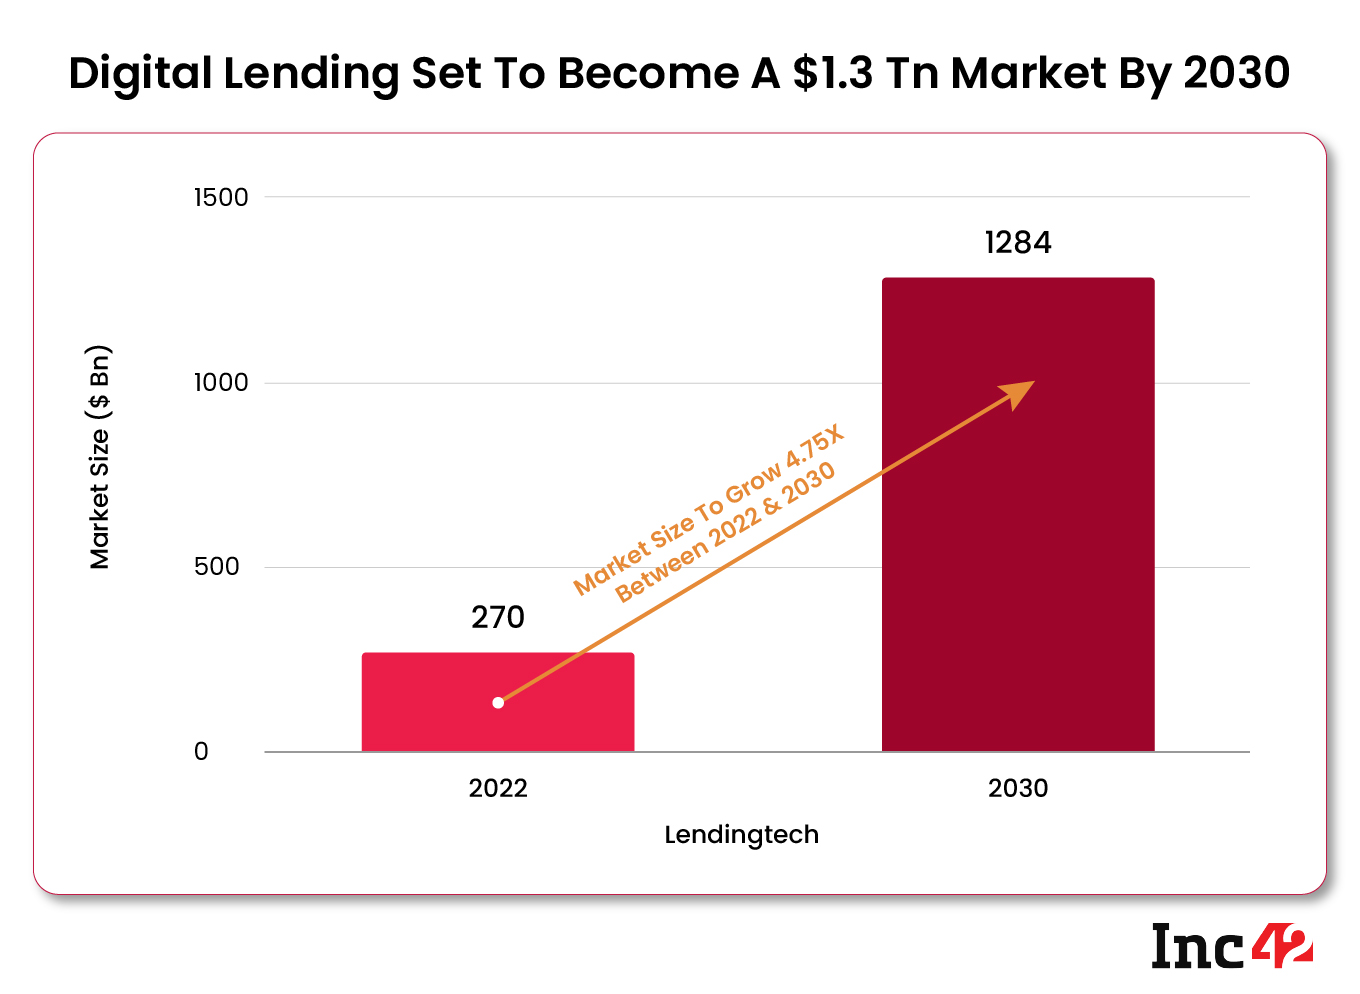 Digital Lending To Become A $1.3 Tn Market By 2030 In India: Report - Inc42 (Picture 2)